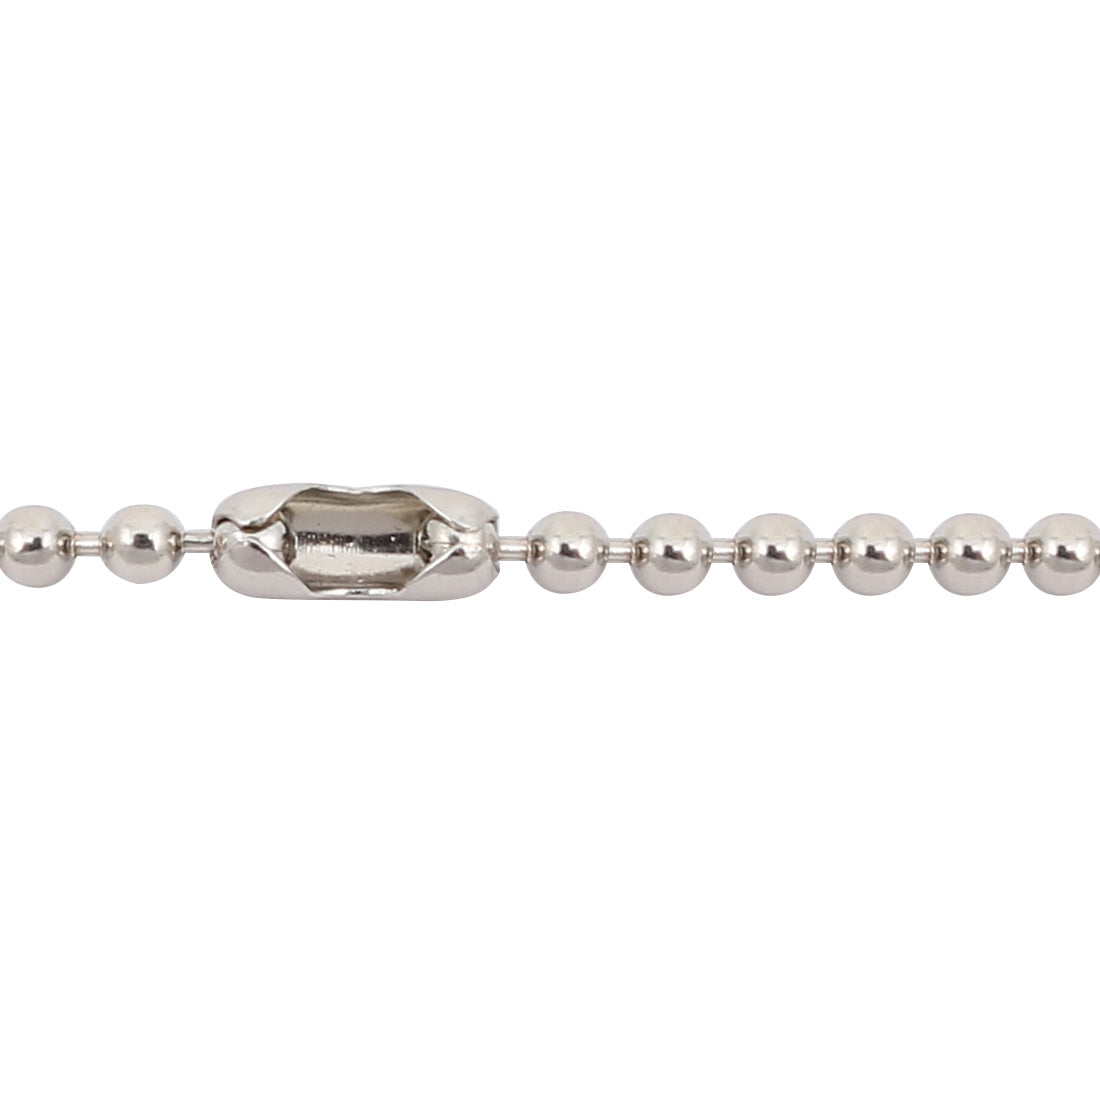 uxcell Uxcell 6pcs Stainless Steel Clasp Ball Chain Keychain Silver Tone 2mm Dia 8cm Length